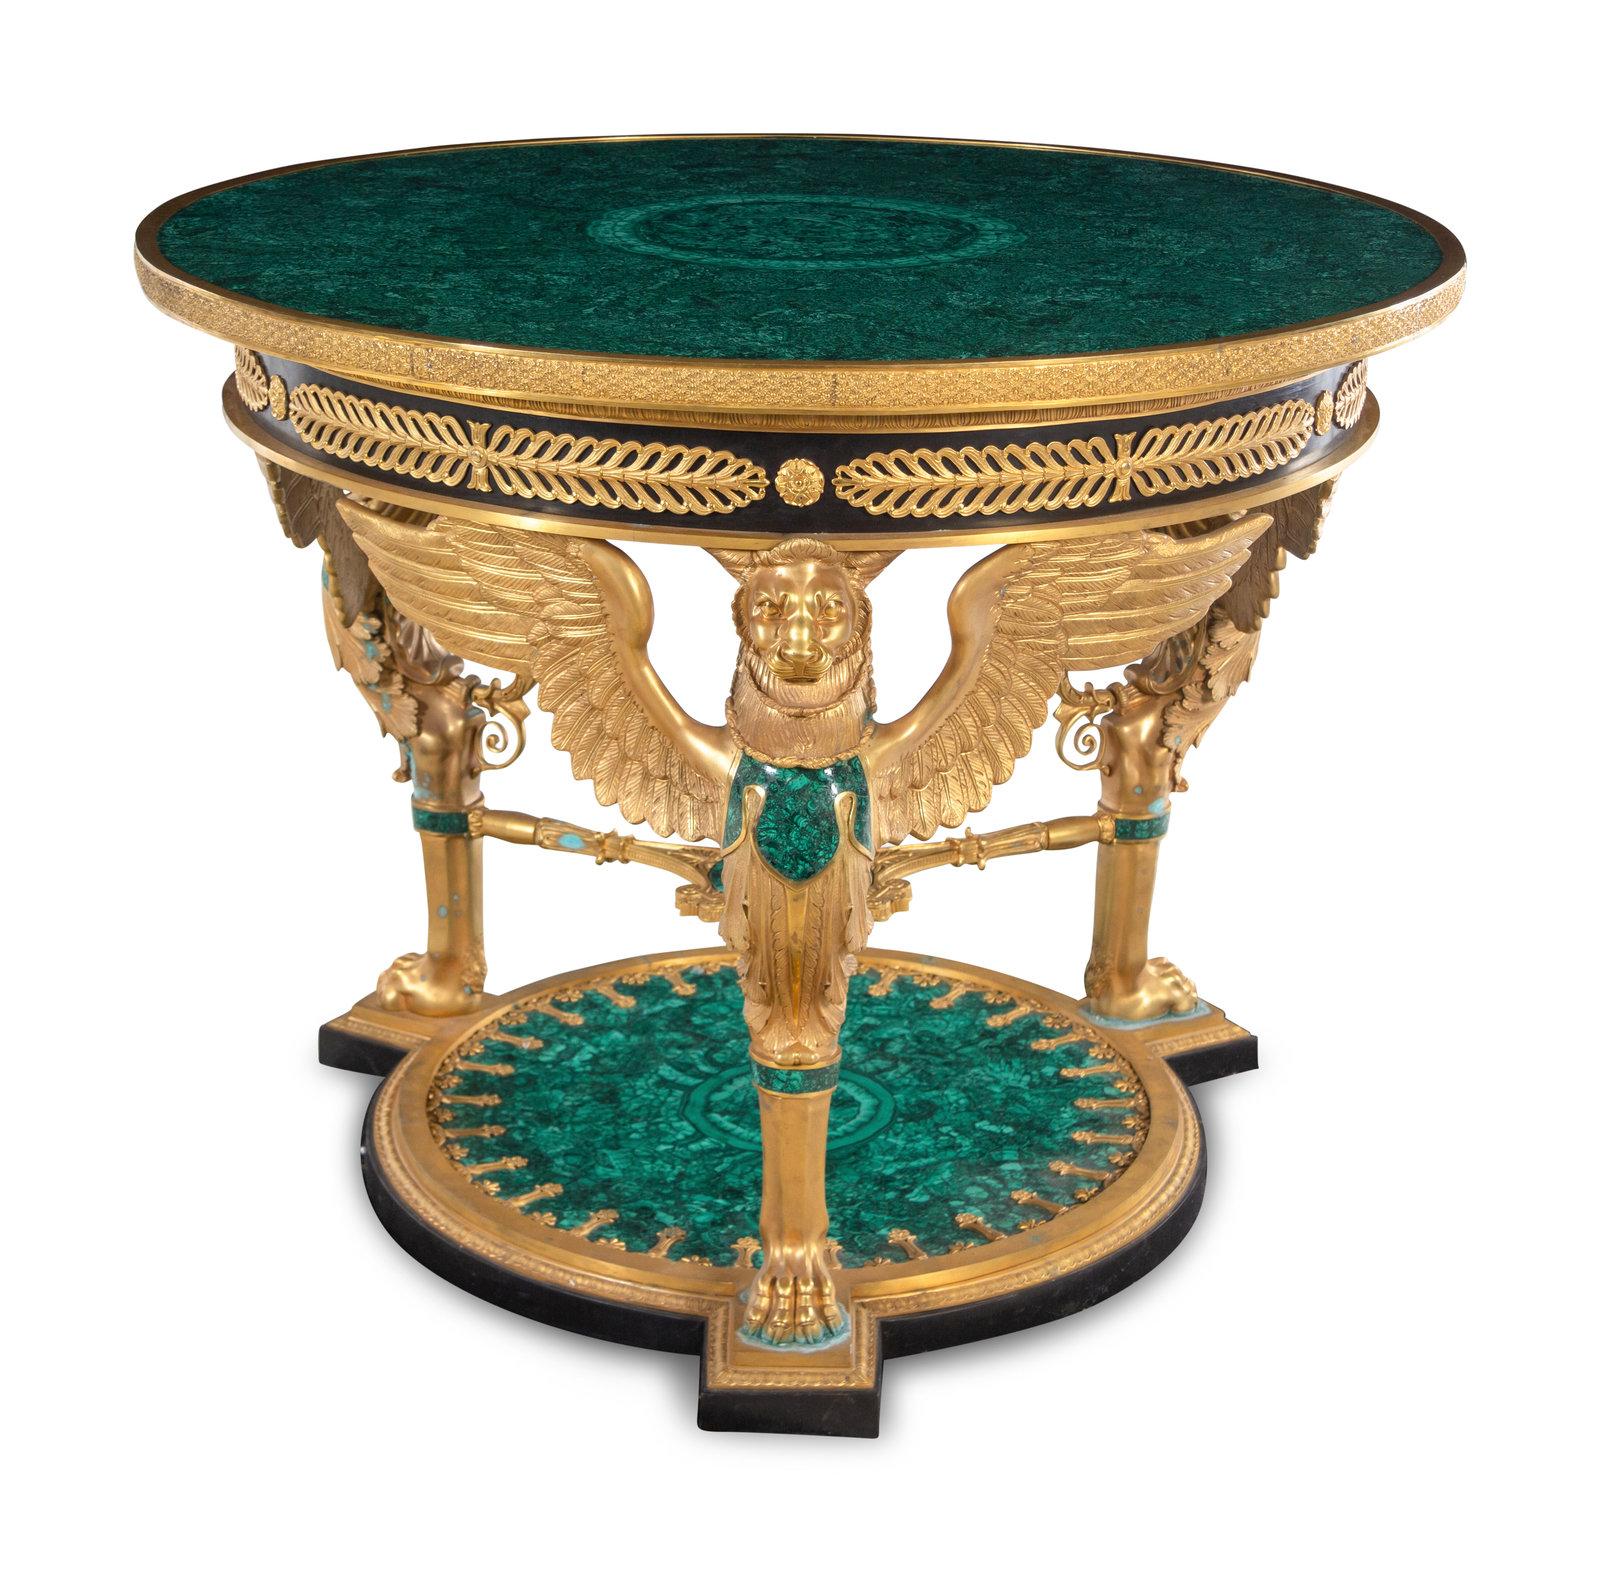 An impressive Empire style Gilt Bronze & Malachite Gueridon. The circular malachite inset top contained in a floral decorated ring, above a frieze featuring alternating rosettes and anthemia, the whole supported by three winged gryphons joined by a